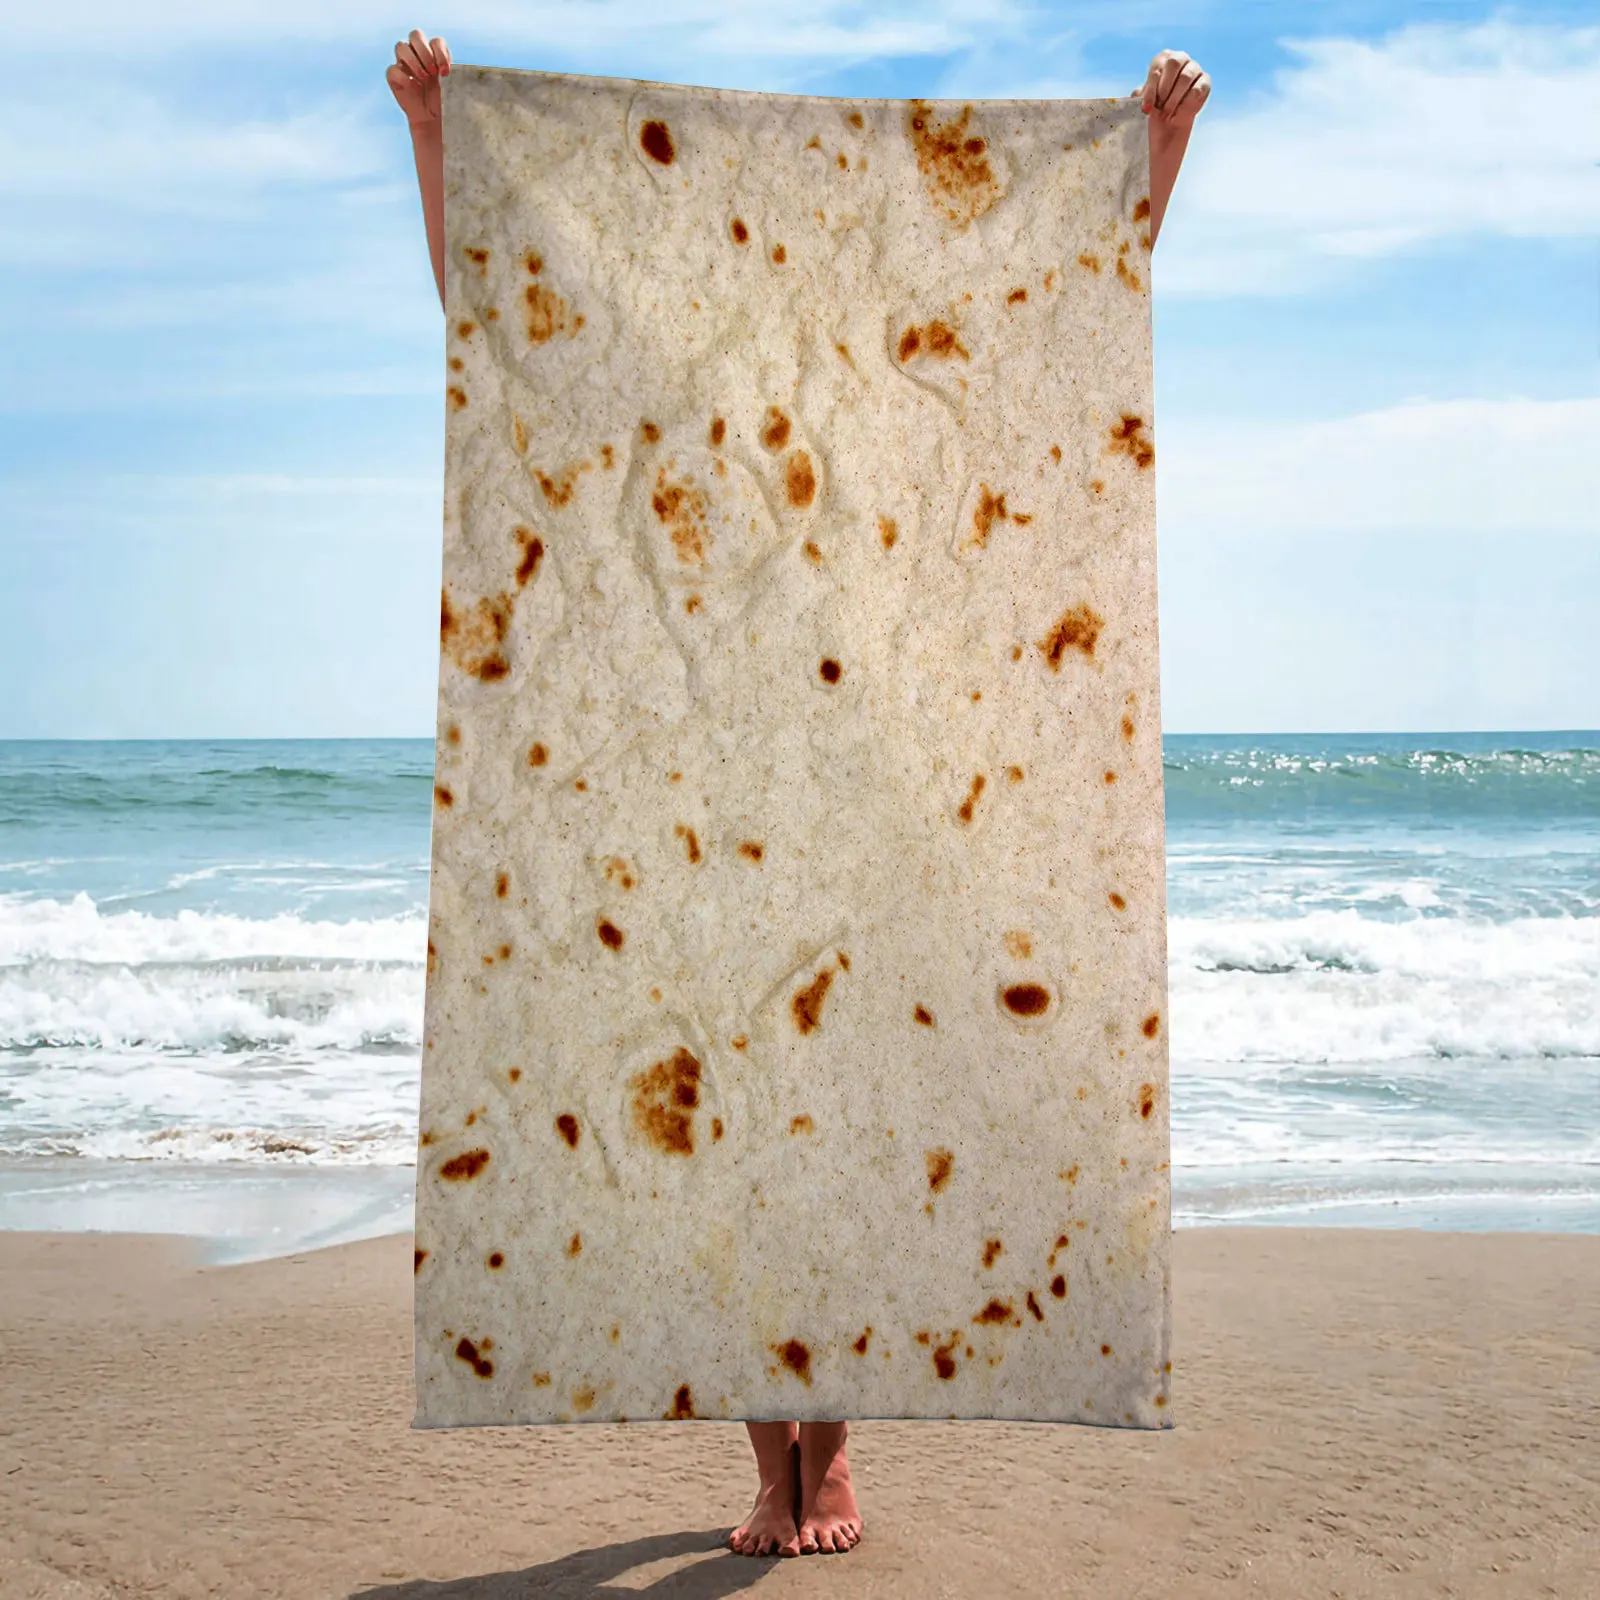 

Mexican Burrito Beach Towel Blanket Lightweight Absorbent Quick Dry Sand Free Swimming Bath Shower Pool Microfiber Towels